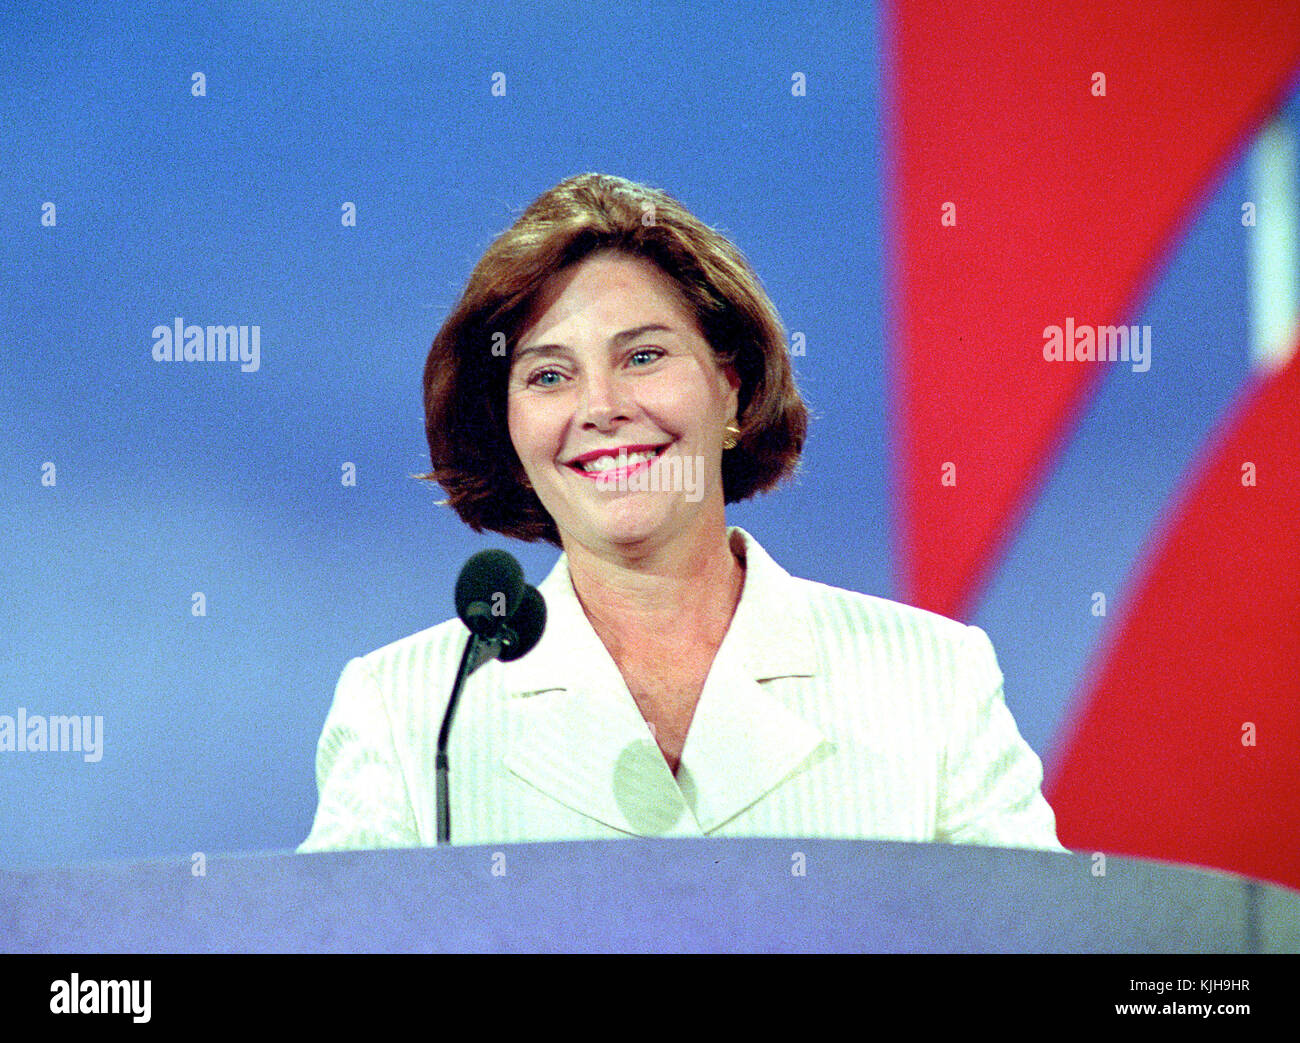 Laura Bush, wife of Governor George W. Bush (Republican of Texas) speaks at the 1996 Republican National Convention at the San Diego Convention Center in San Diego, California on August 12, 1996. Credit: Ron Sachs/CNP - NO WIRE SERVICE - Photo: Ron Sachs/Consolidated/dpa Stock Photo